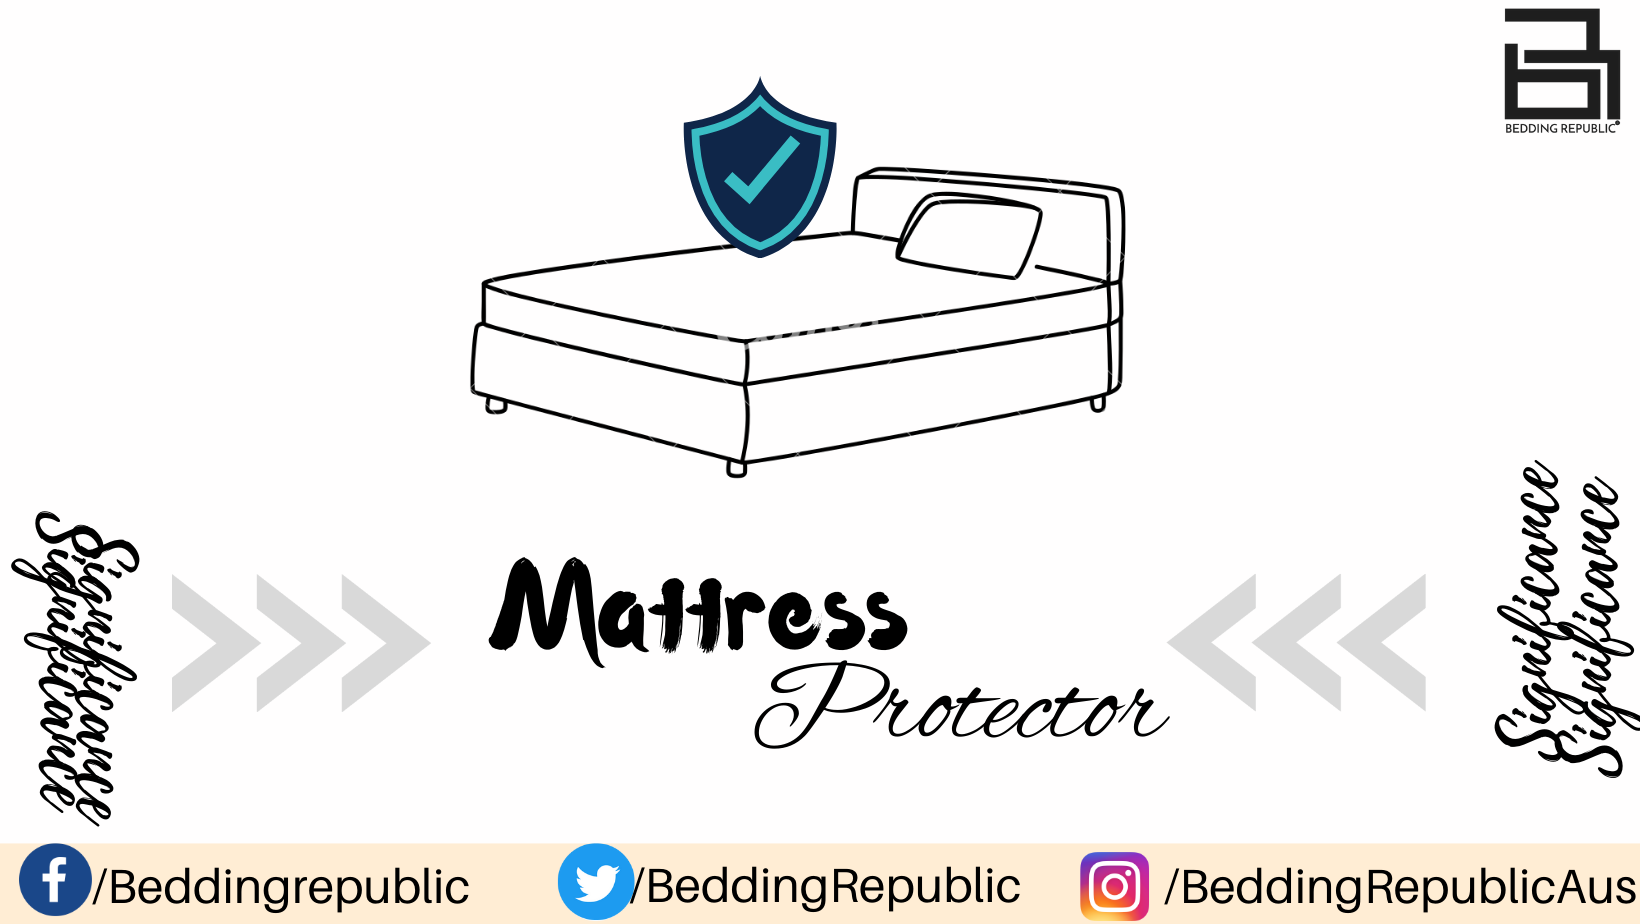 should i was mattress protector before use